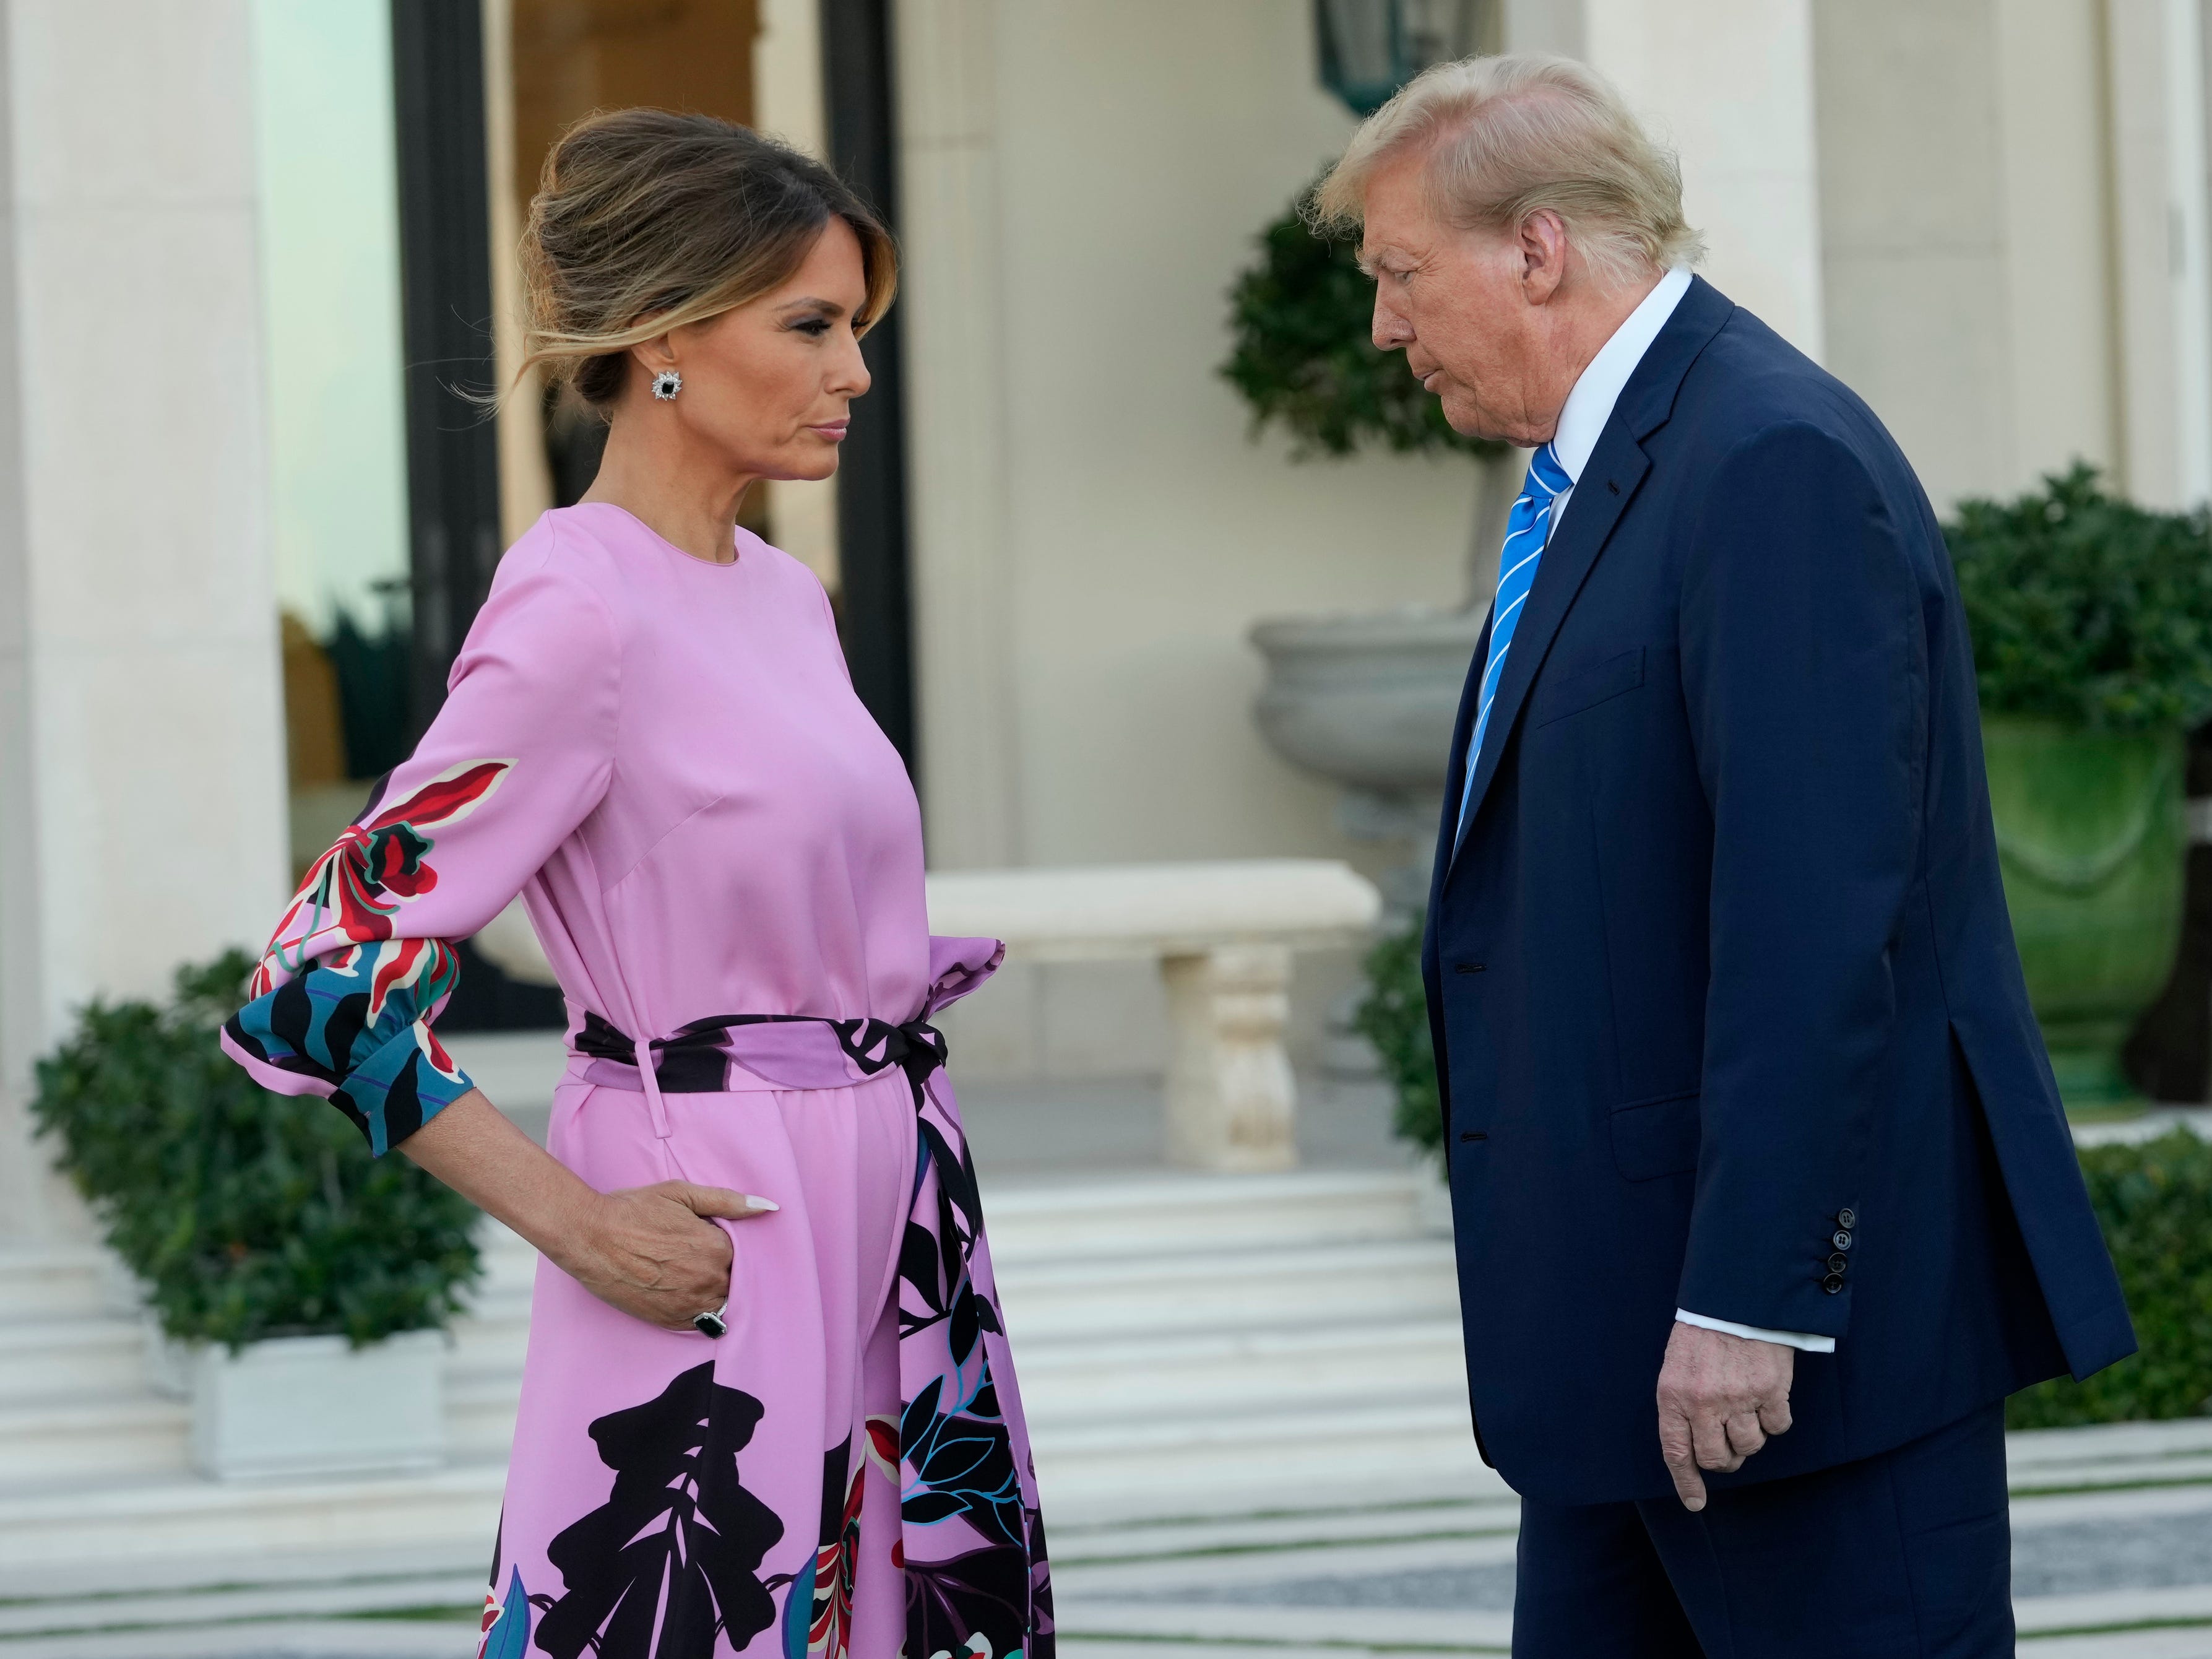 <p><a href="https://www.nytimes.com/2023/07/26/us/politics/melania-trump-2024-campaign.html">The New York Times</a> reported in July 2023 that Trump had repeatedly refused her husband's offers to join him at campaign events, though she continued to support him behind the scenes.</p><p>Donald Trump told "Meet the Press" moderator Kristen Welker in September that Trump is a <a href="https://www.businessinsider.com/melania-refused-to-campaign-but-will-soon-according-to-trump-2023-9">"private person"</a> and that he likes to keep her away from campaigning because "it's so nasty and so mean."</p><p>Trump appeared to distance herself from <a href="https://www.businessinsider.com/melania-trump-campaign-return-absence-2024-4">Donald Trump's subsequent 2024 reelection campaign</a> until April 2024, when she spoke at a Log Cabin Republicans event.</p>